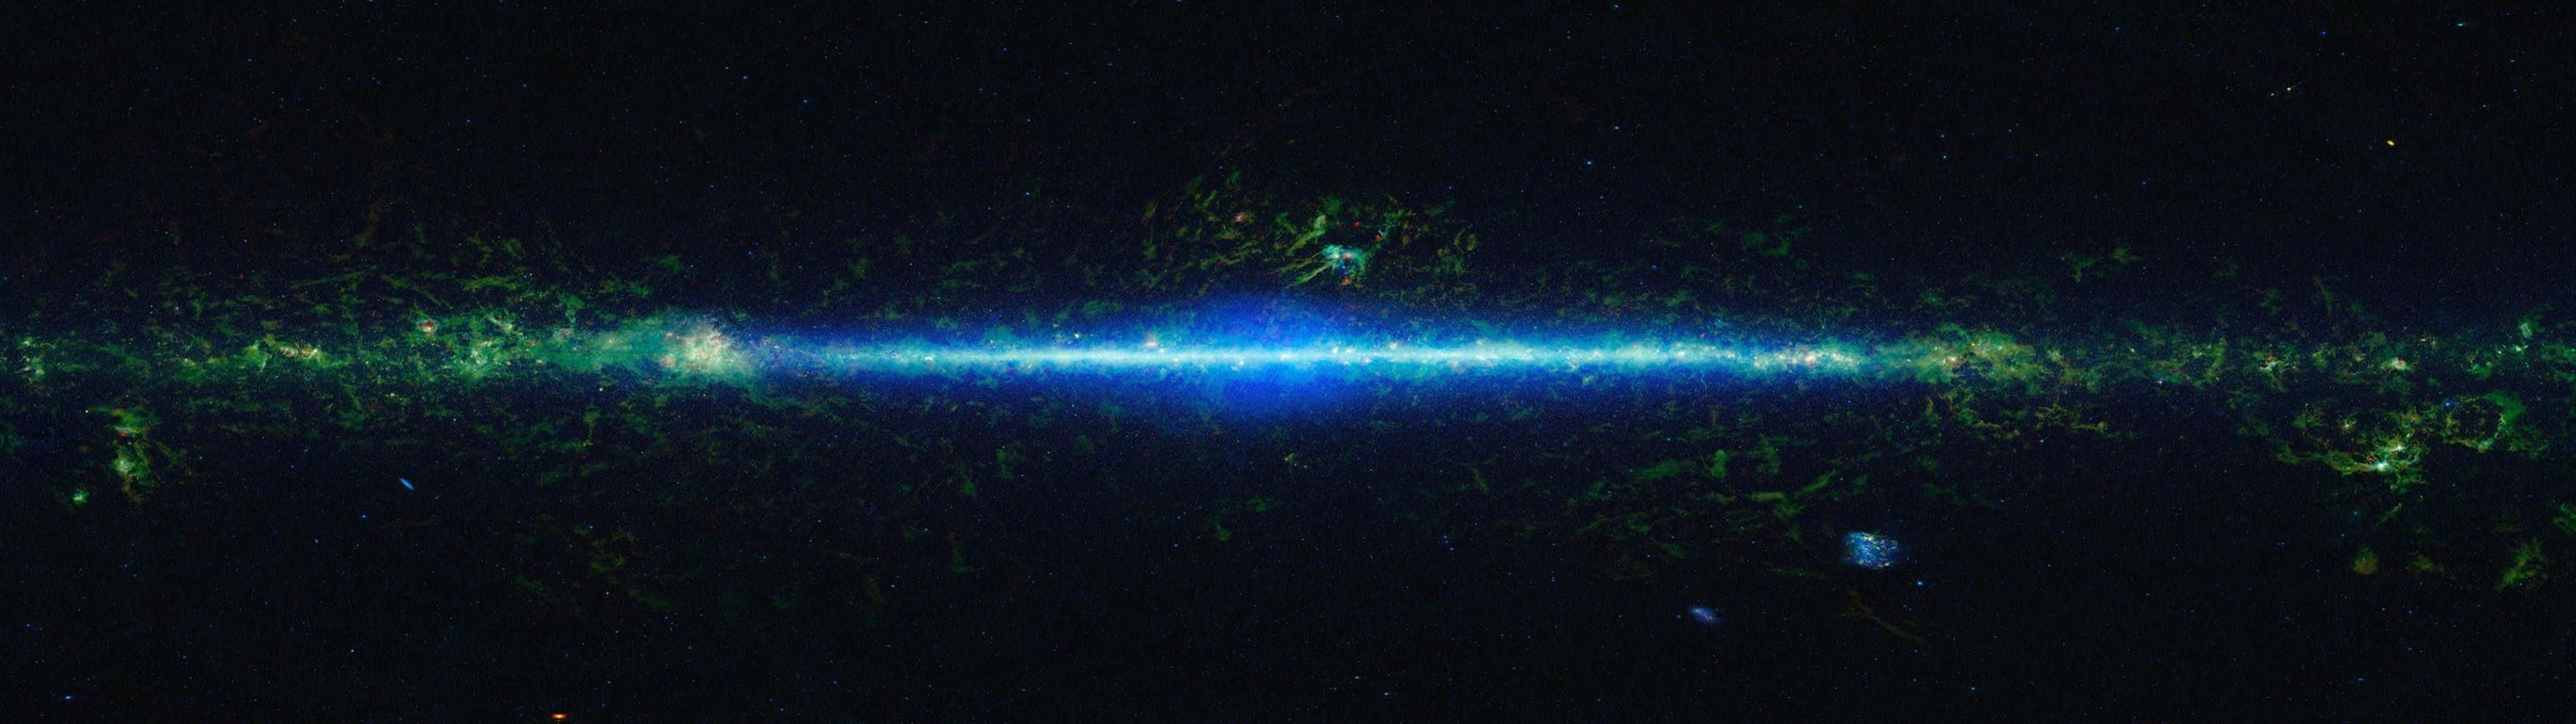 A Blue And Green Galaxy In Space Wallpaper